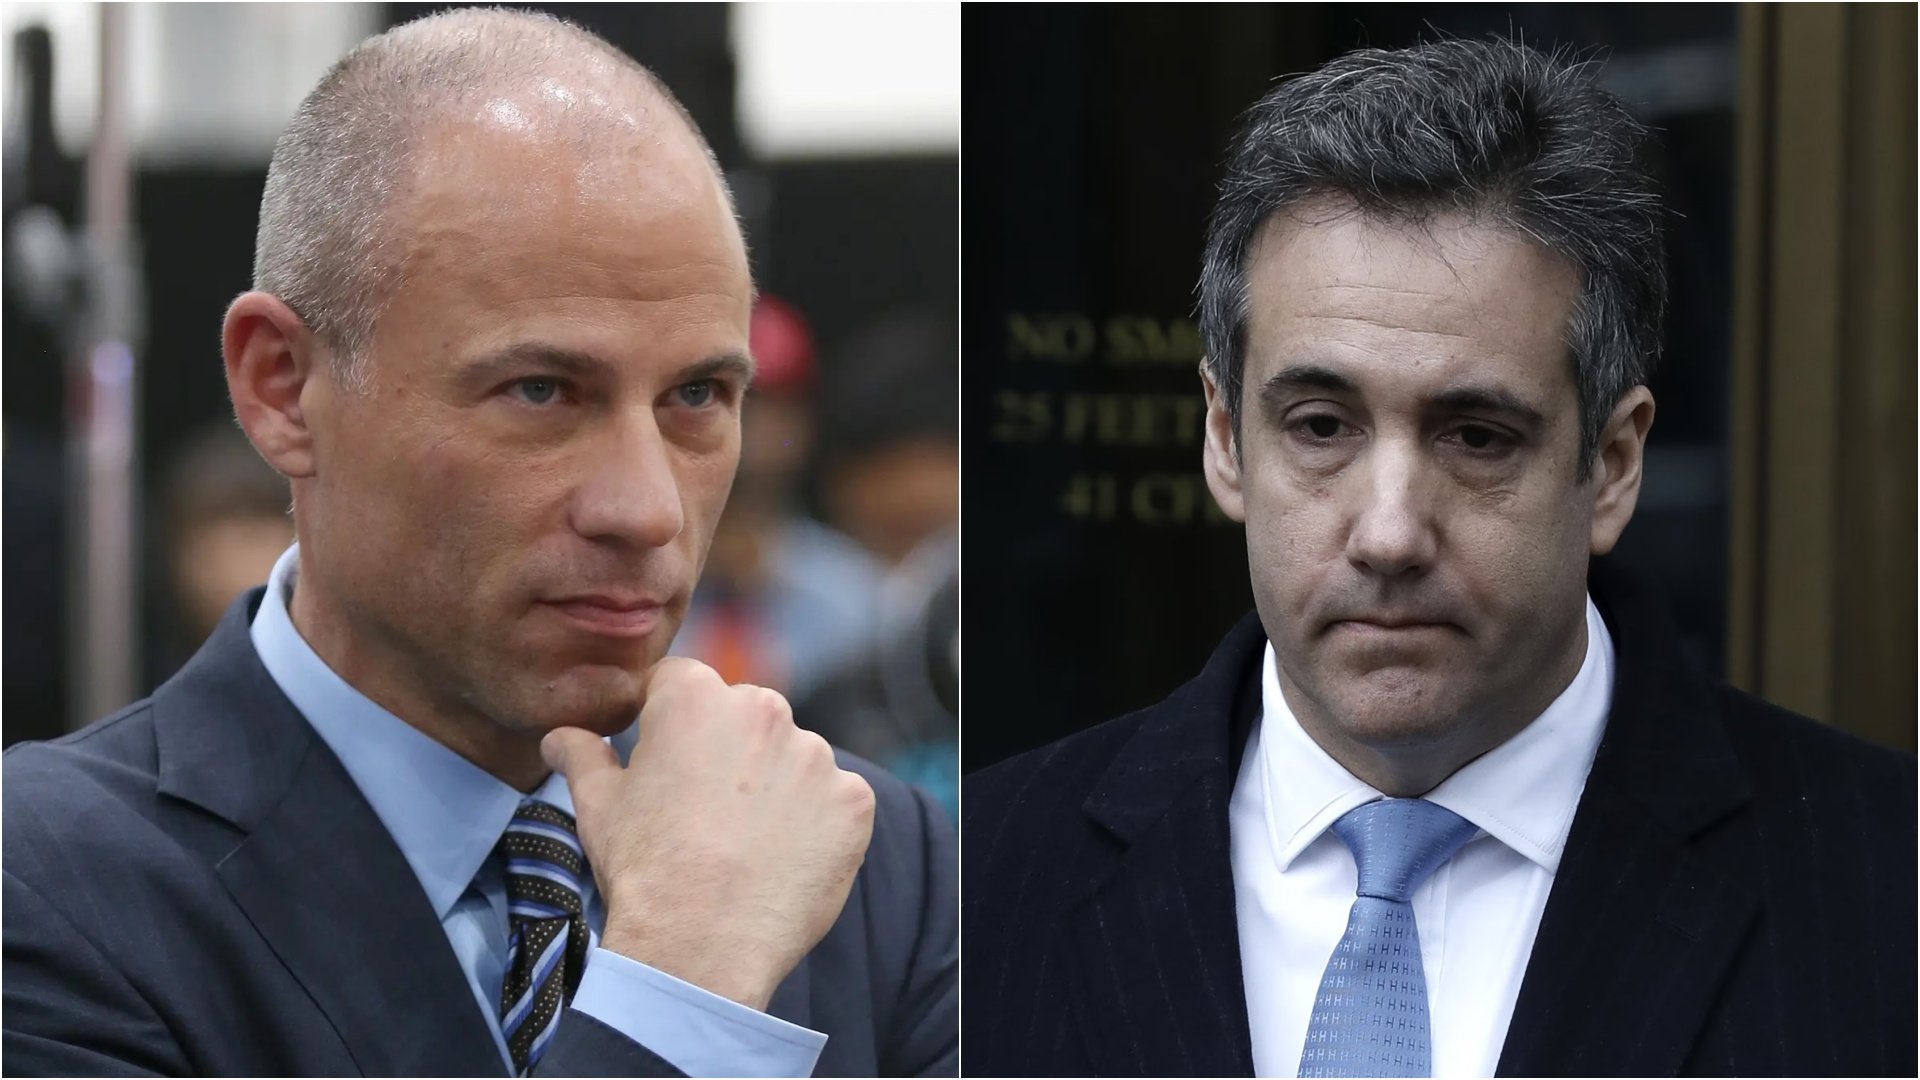 Stormy Daniels' former lawyer Michael Avenatti SLAMS Michael Cohen behind bars for being a “liar and total fraud” |  The Gateway expert